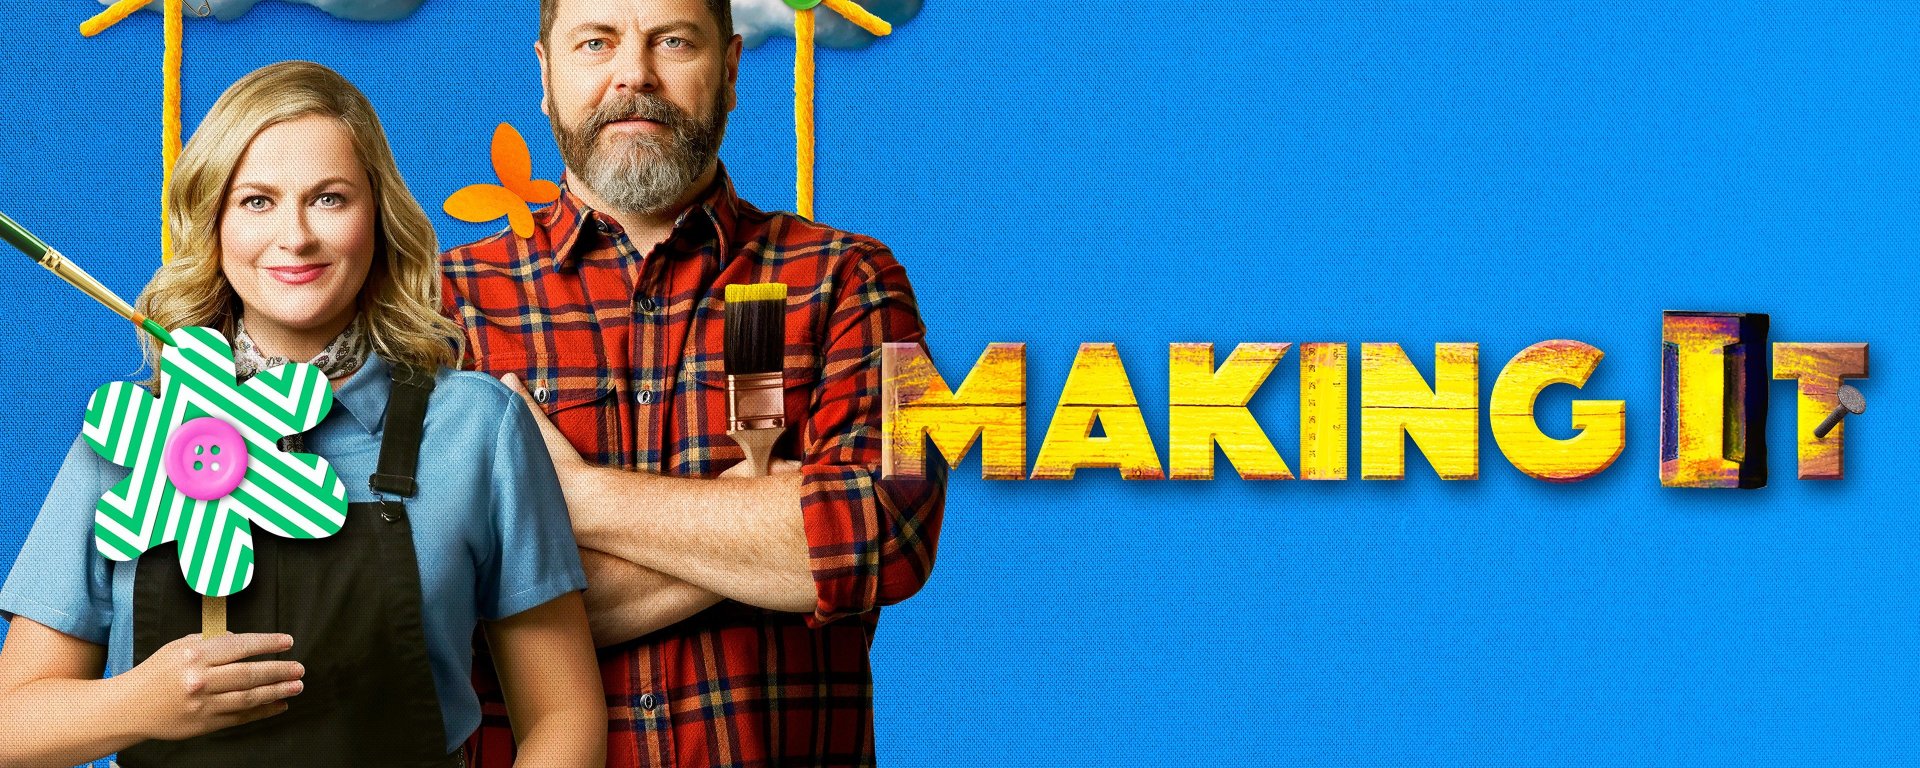 nick offerman and amy poehler on a blue background with yellow font spelling out "making it"